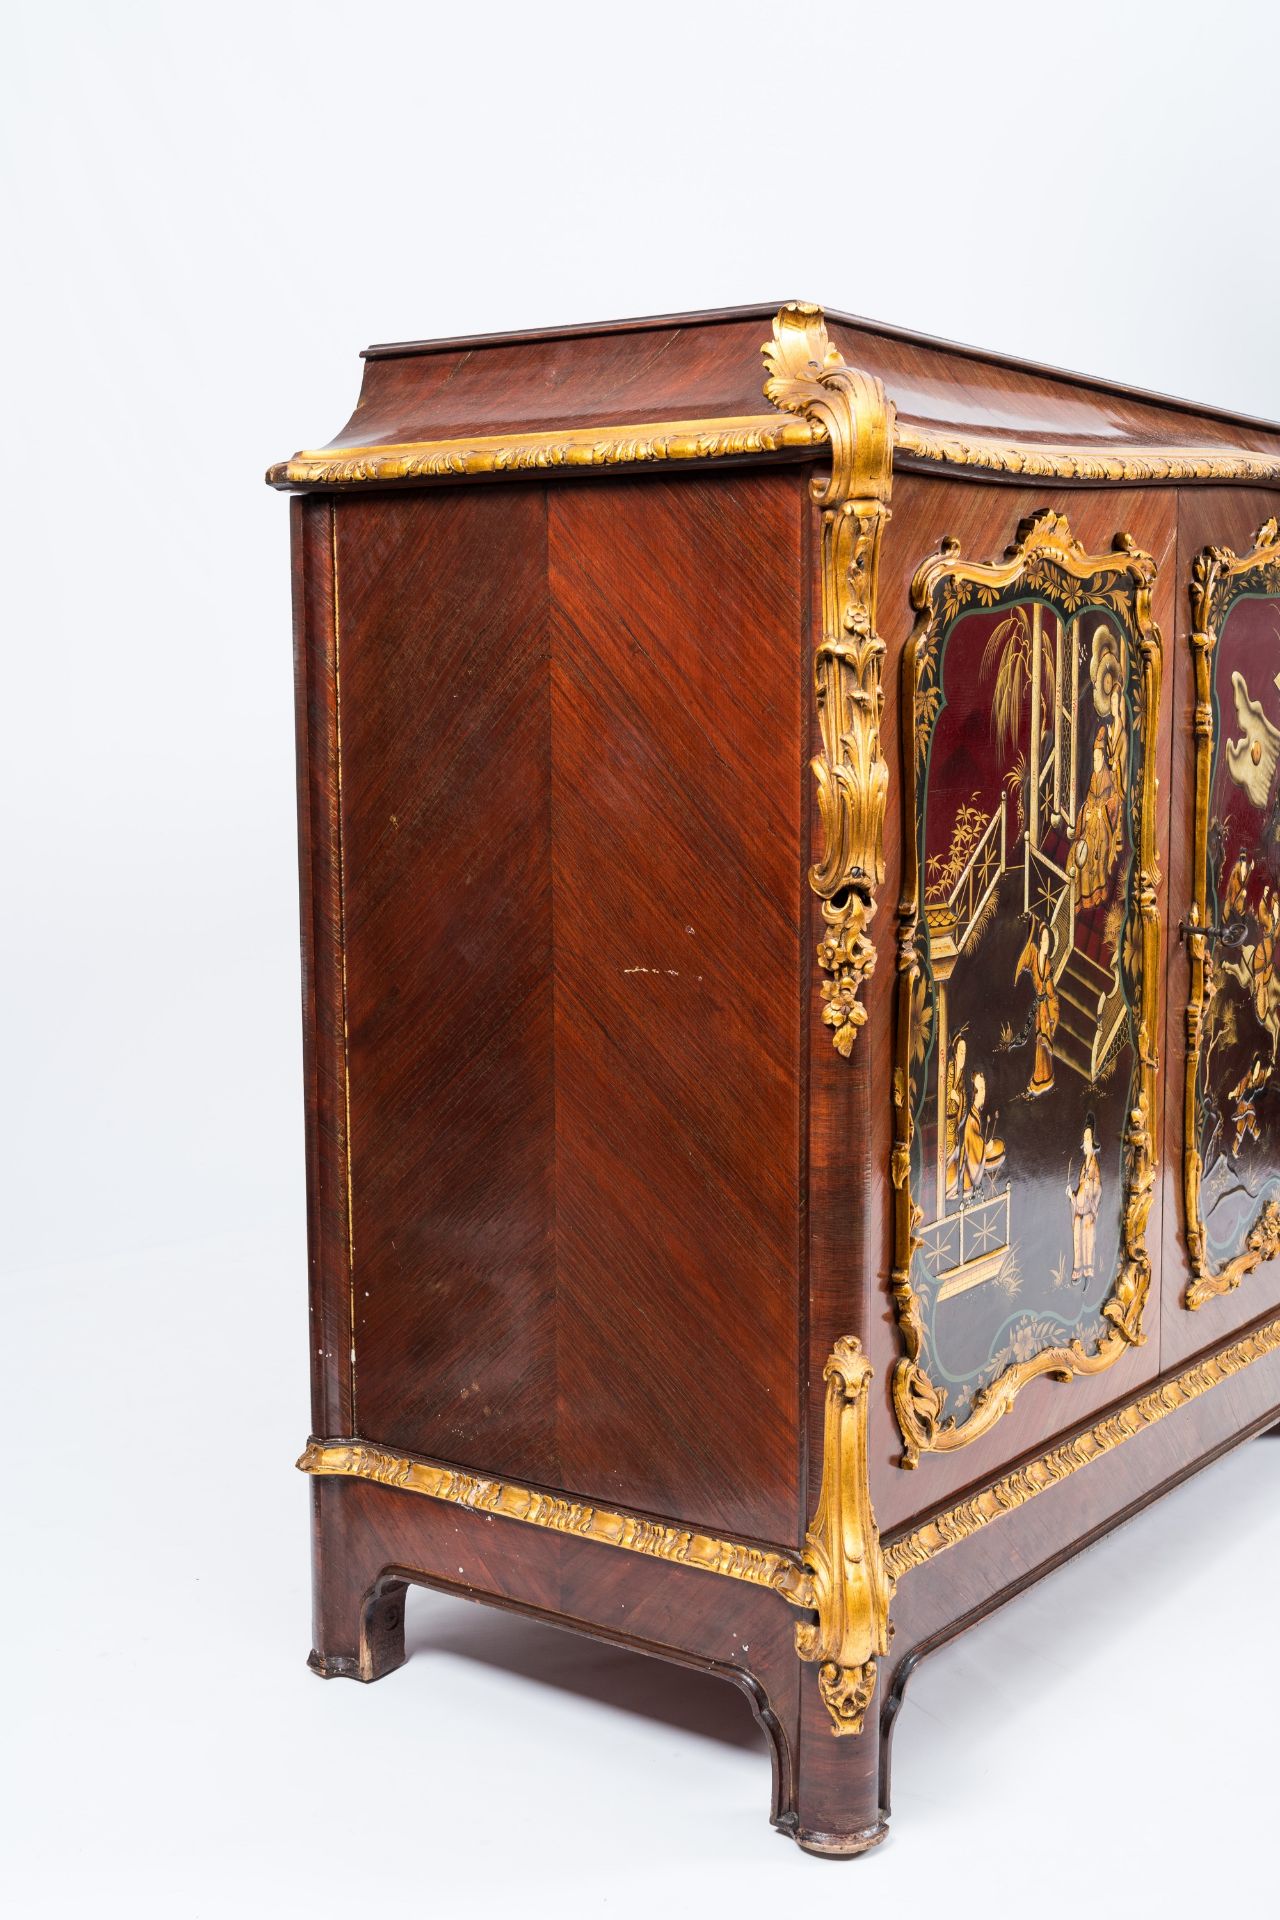 A French gilt wood and mahogany veneered four-door sideboard with oriental style lacquer, 20th C. - Image 6 of 10